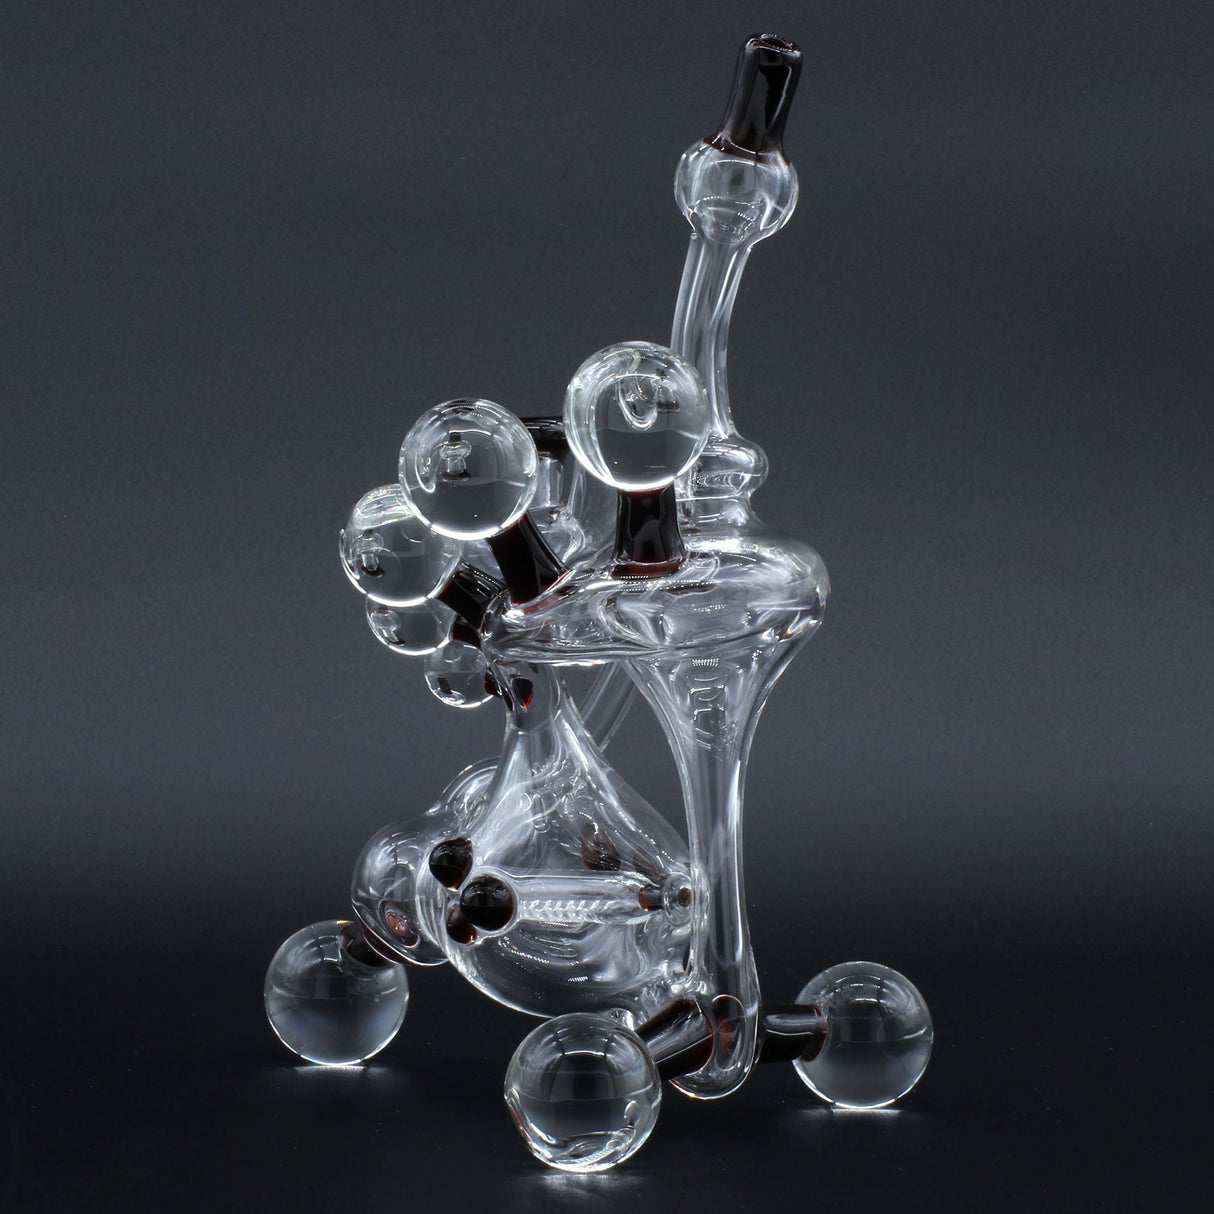 Clayball Glass "Crimson Dreams" Heady Recycler Dab-Rig with in-line percolator, front view on black